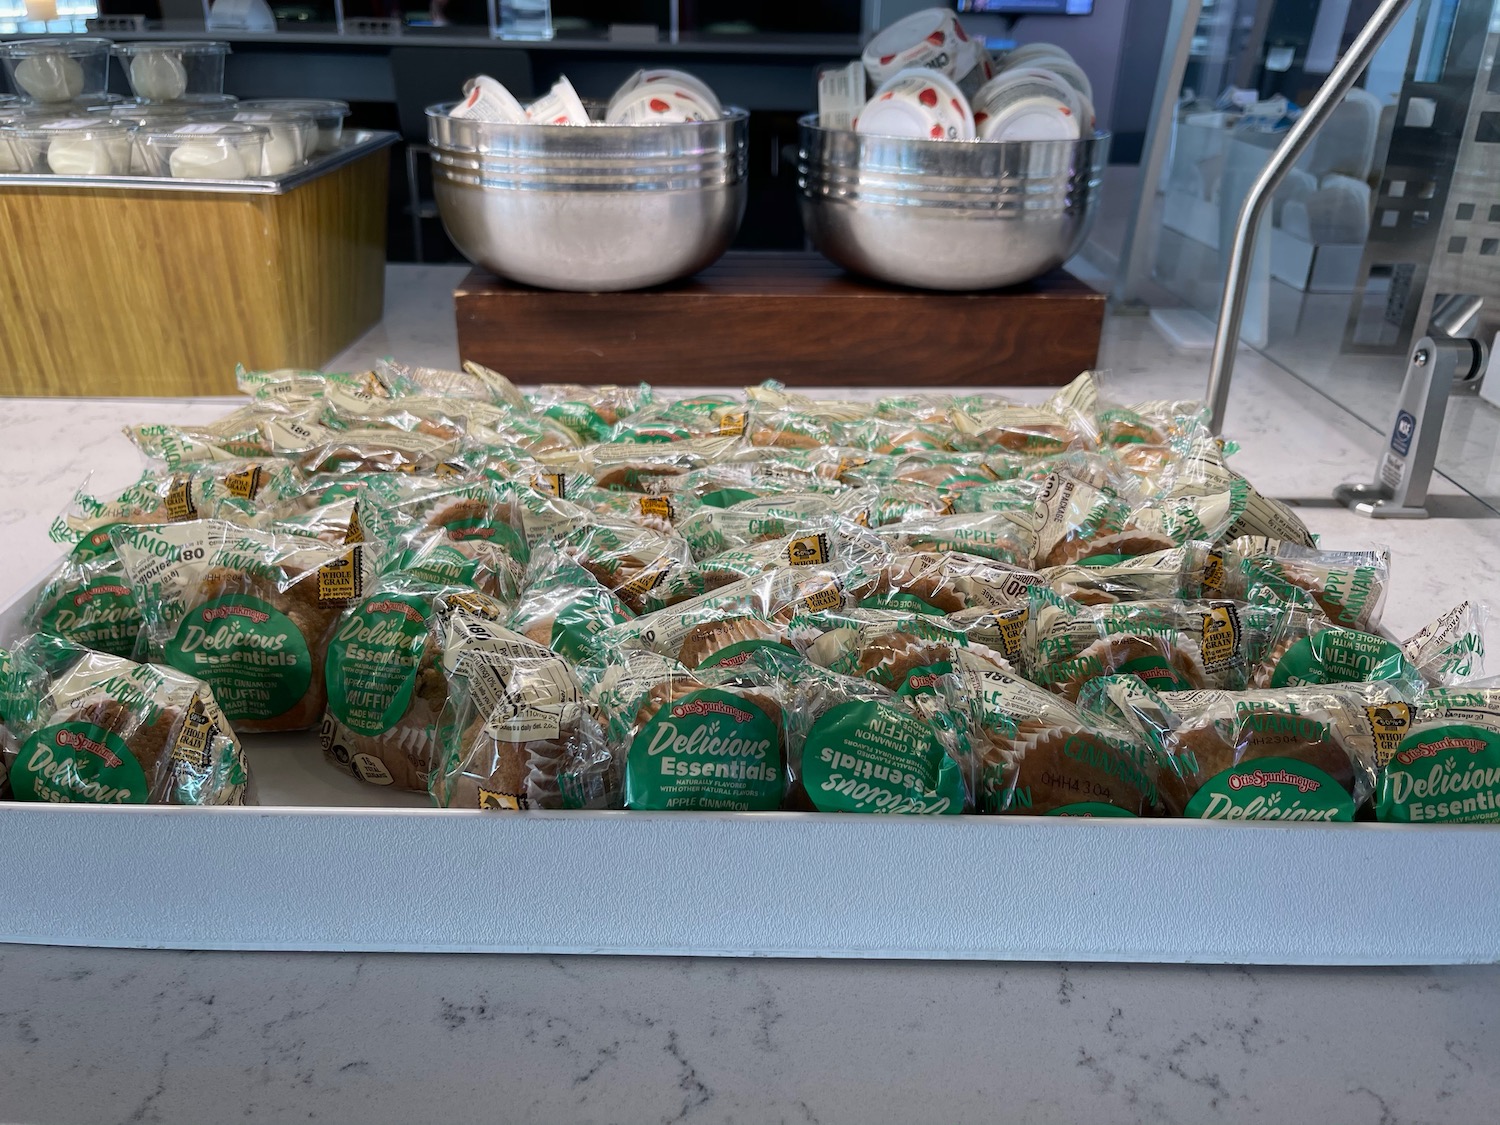 a tray of cookies in plastic bags